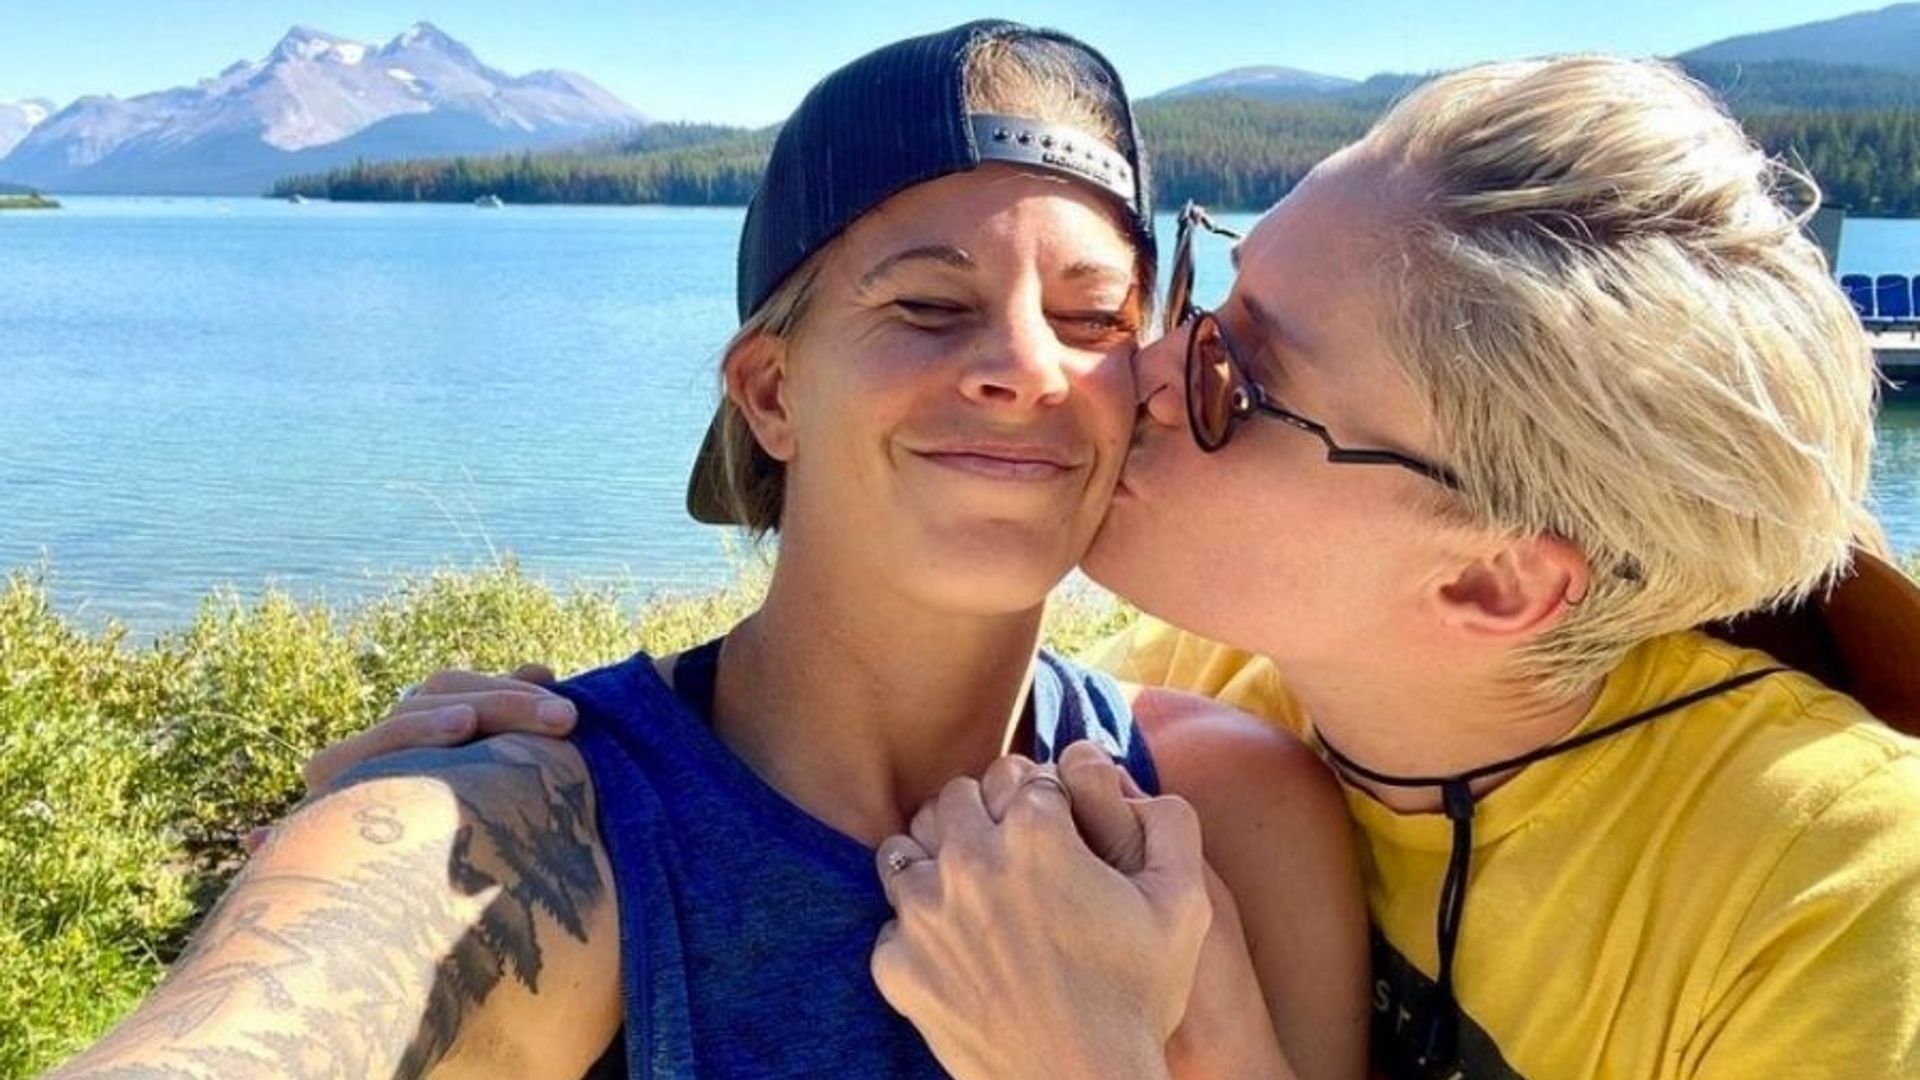 Two Canadian Olympians just got engaged – and their photos and joy will warm your heart